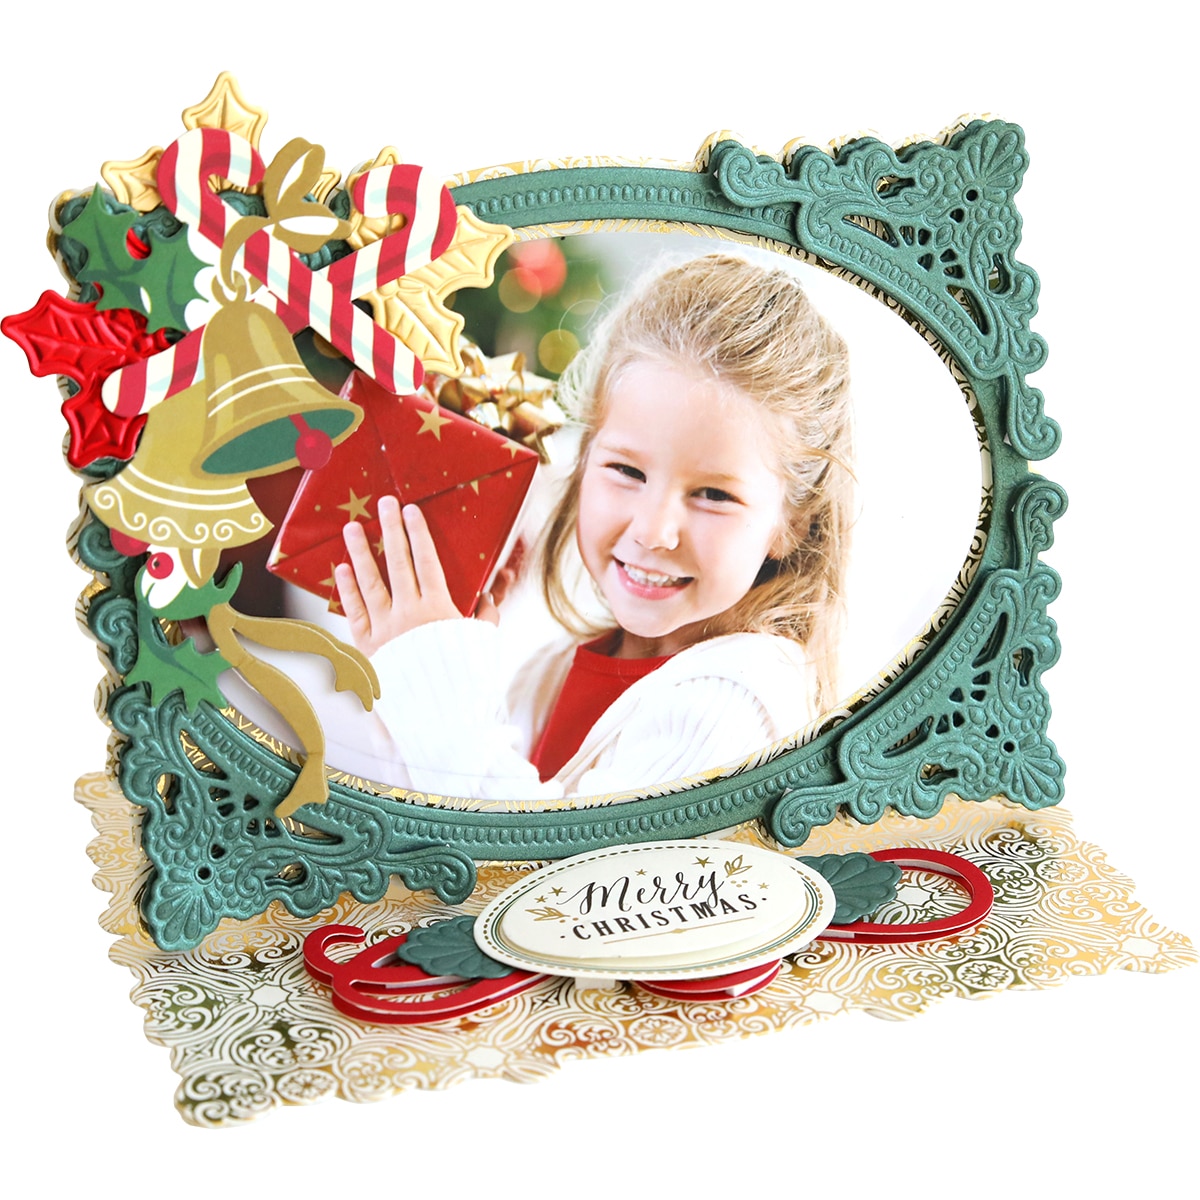 A christmas photo frame with a girl holding a photo.